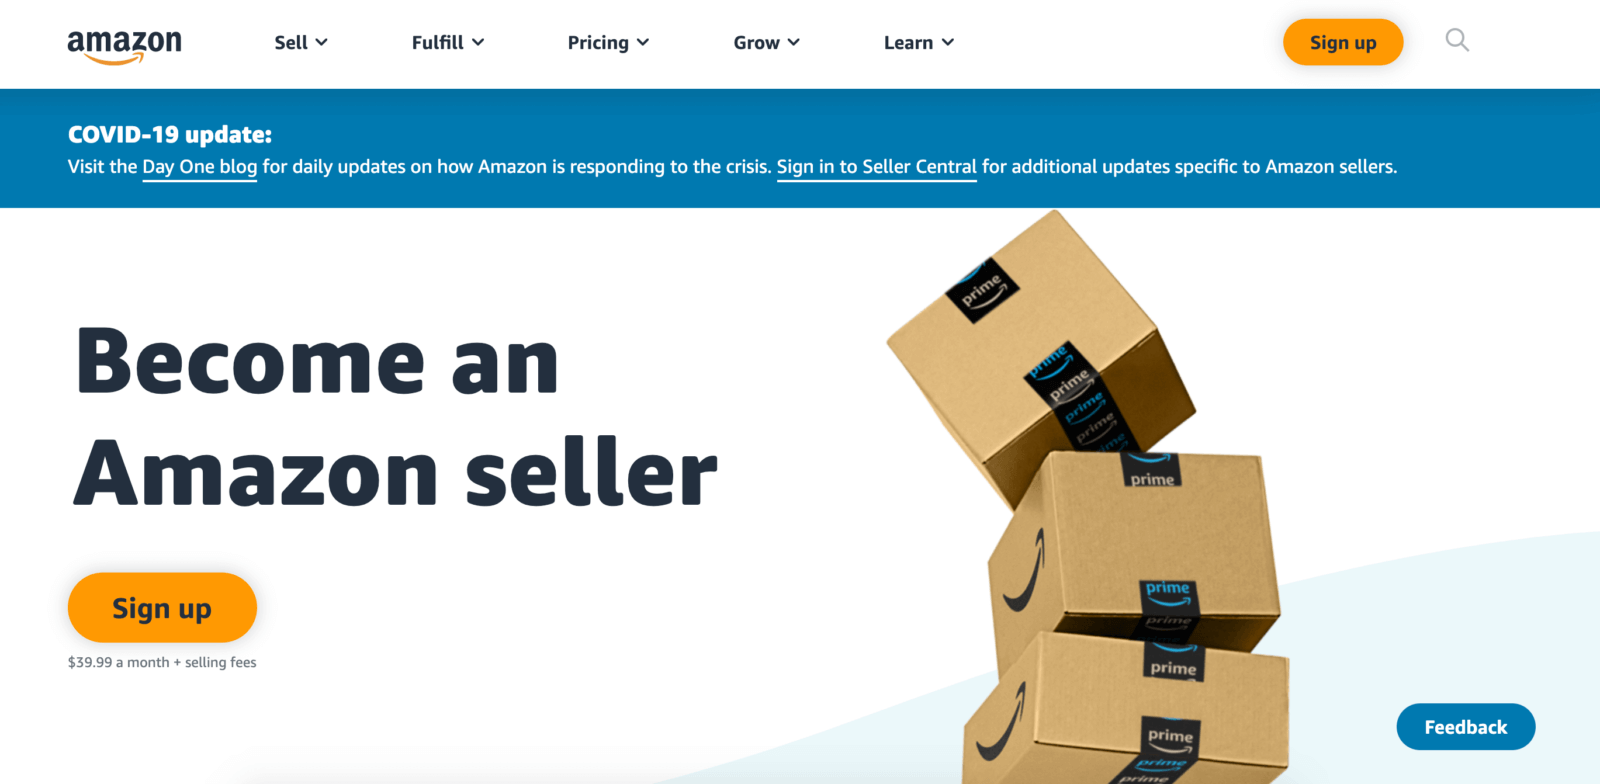 Why How To Become An Amazon Seller Is No Friend To Small Business